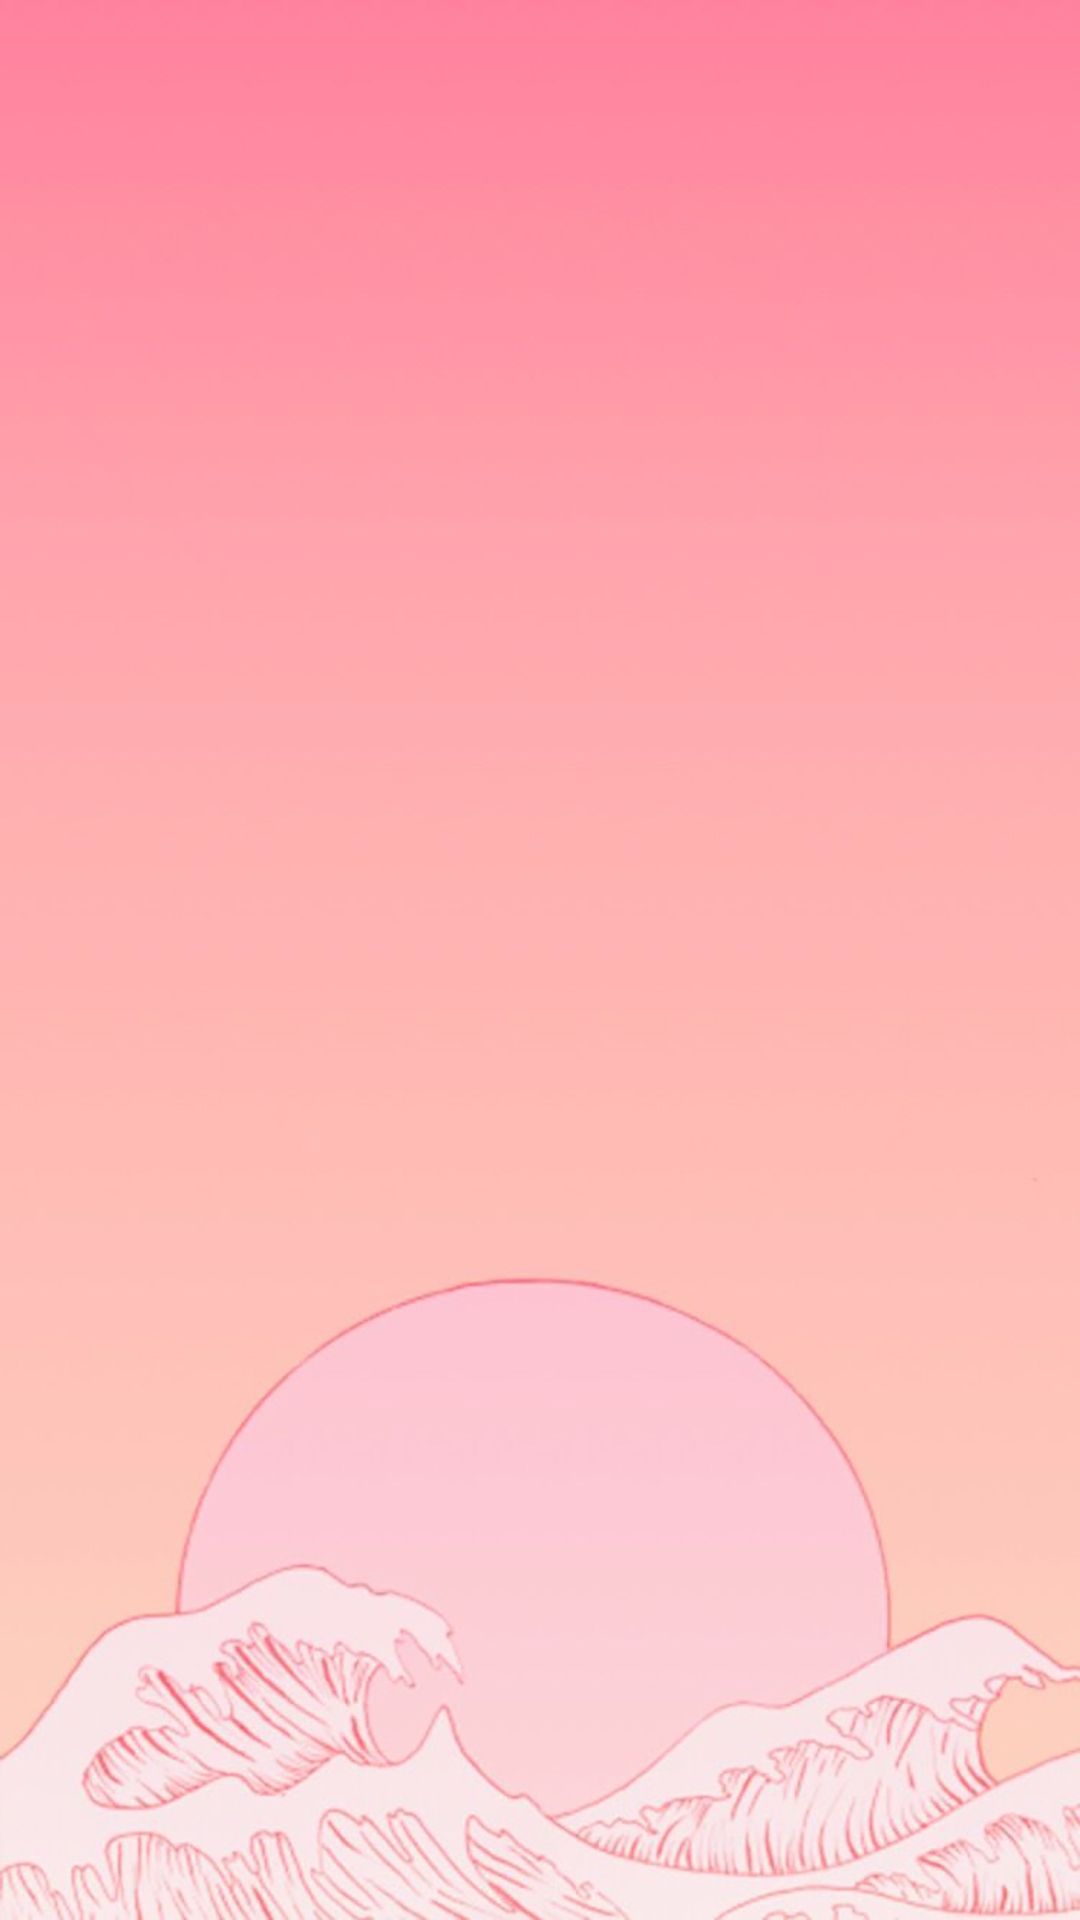 IPhone wallpaper aesthetic sunset pink with high-resolution 1080x1920 pixel. You can use this wallpaper for your iPhone 5, 6, 7, 8, X, XS, XR backgrounds, Mobile Screensaver, or iPad Lock Screen - Wave